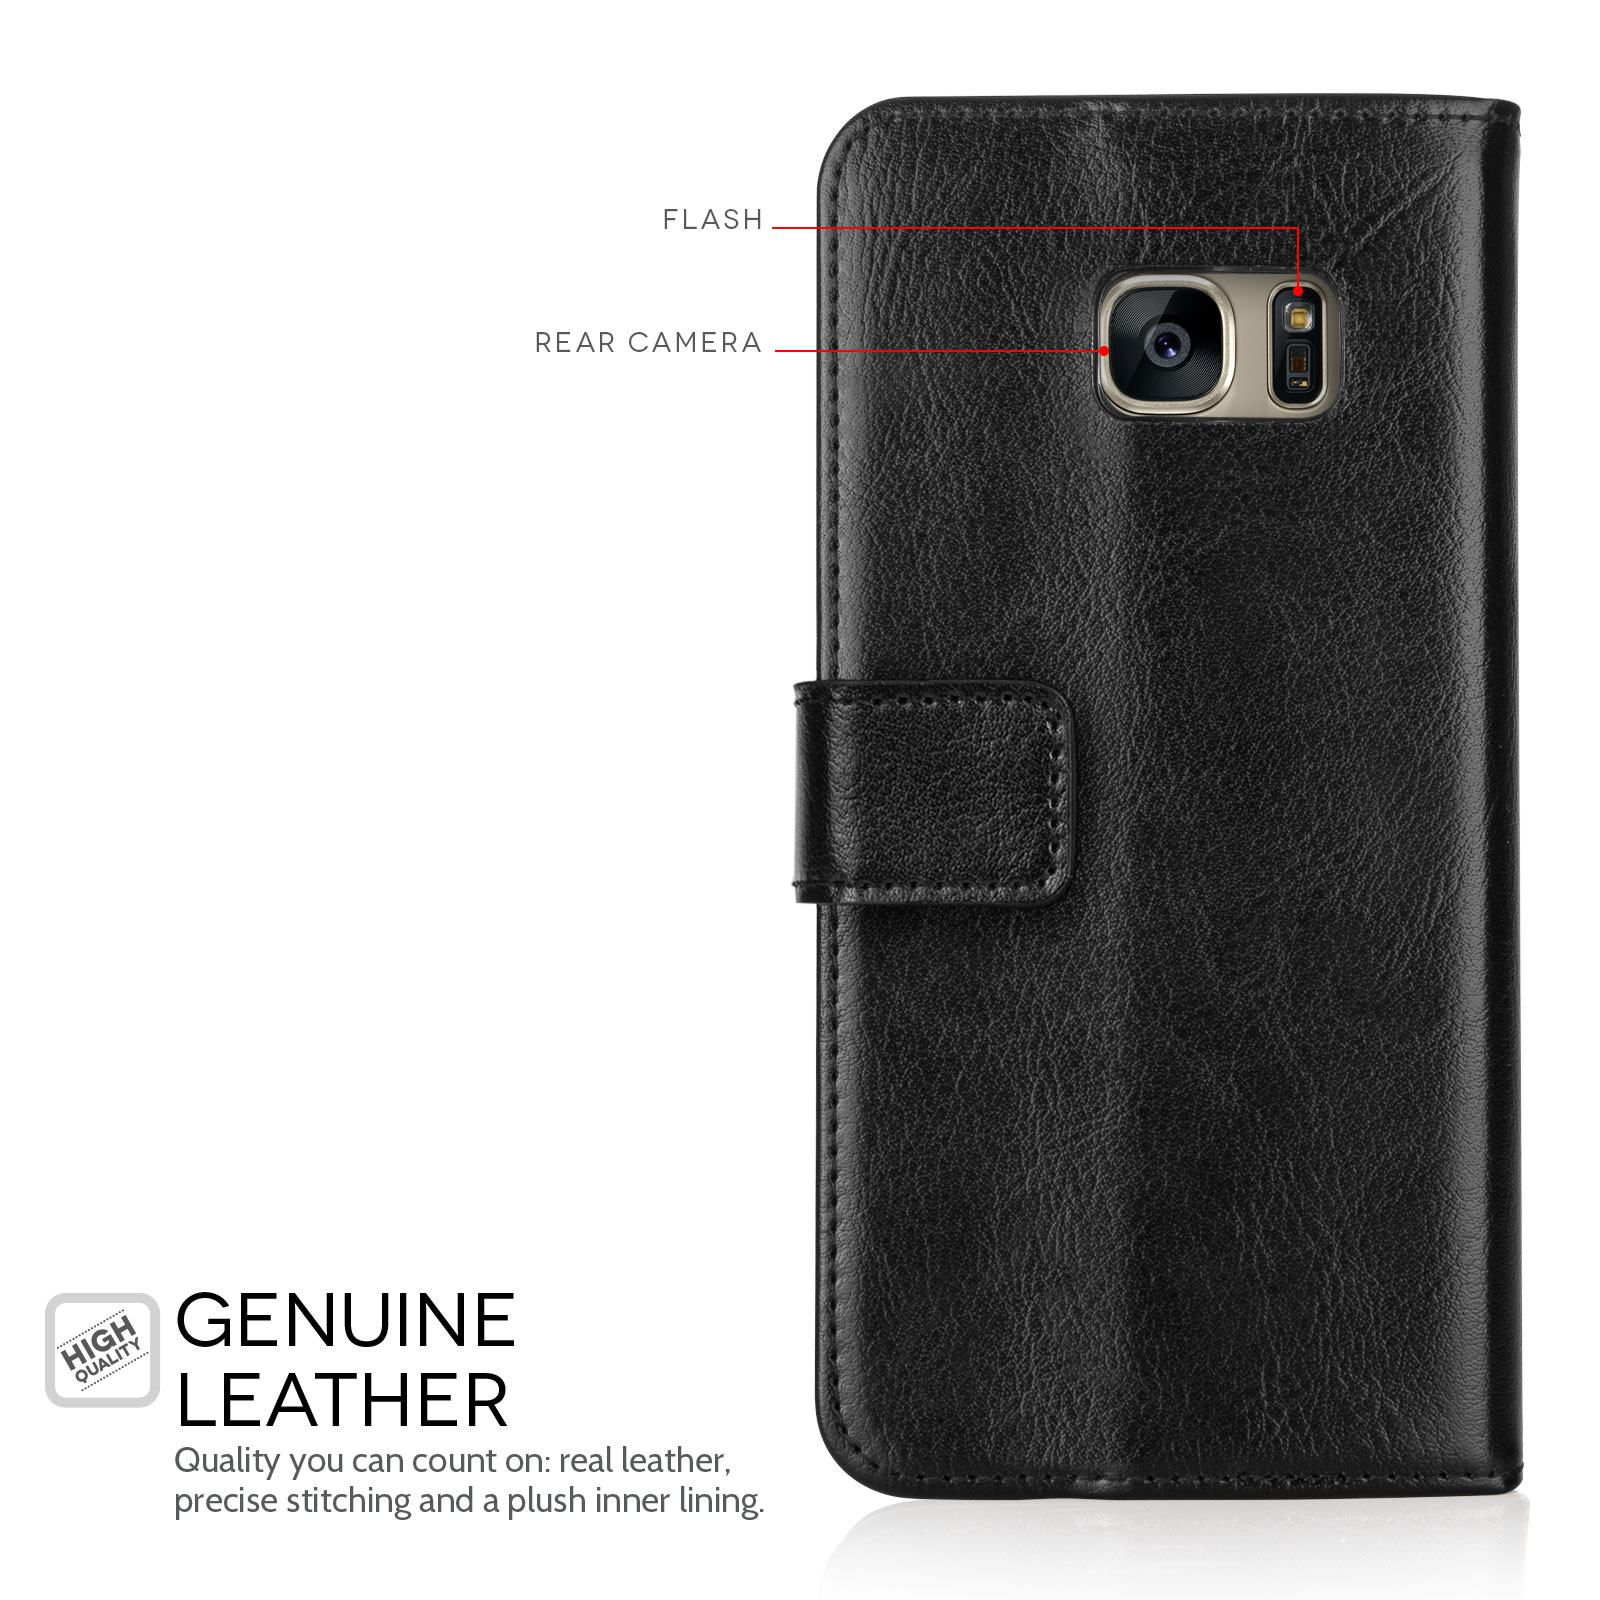 Caseflex Samsung Galaxy S7 Real Leather Wallet Case with ID Slot - Black